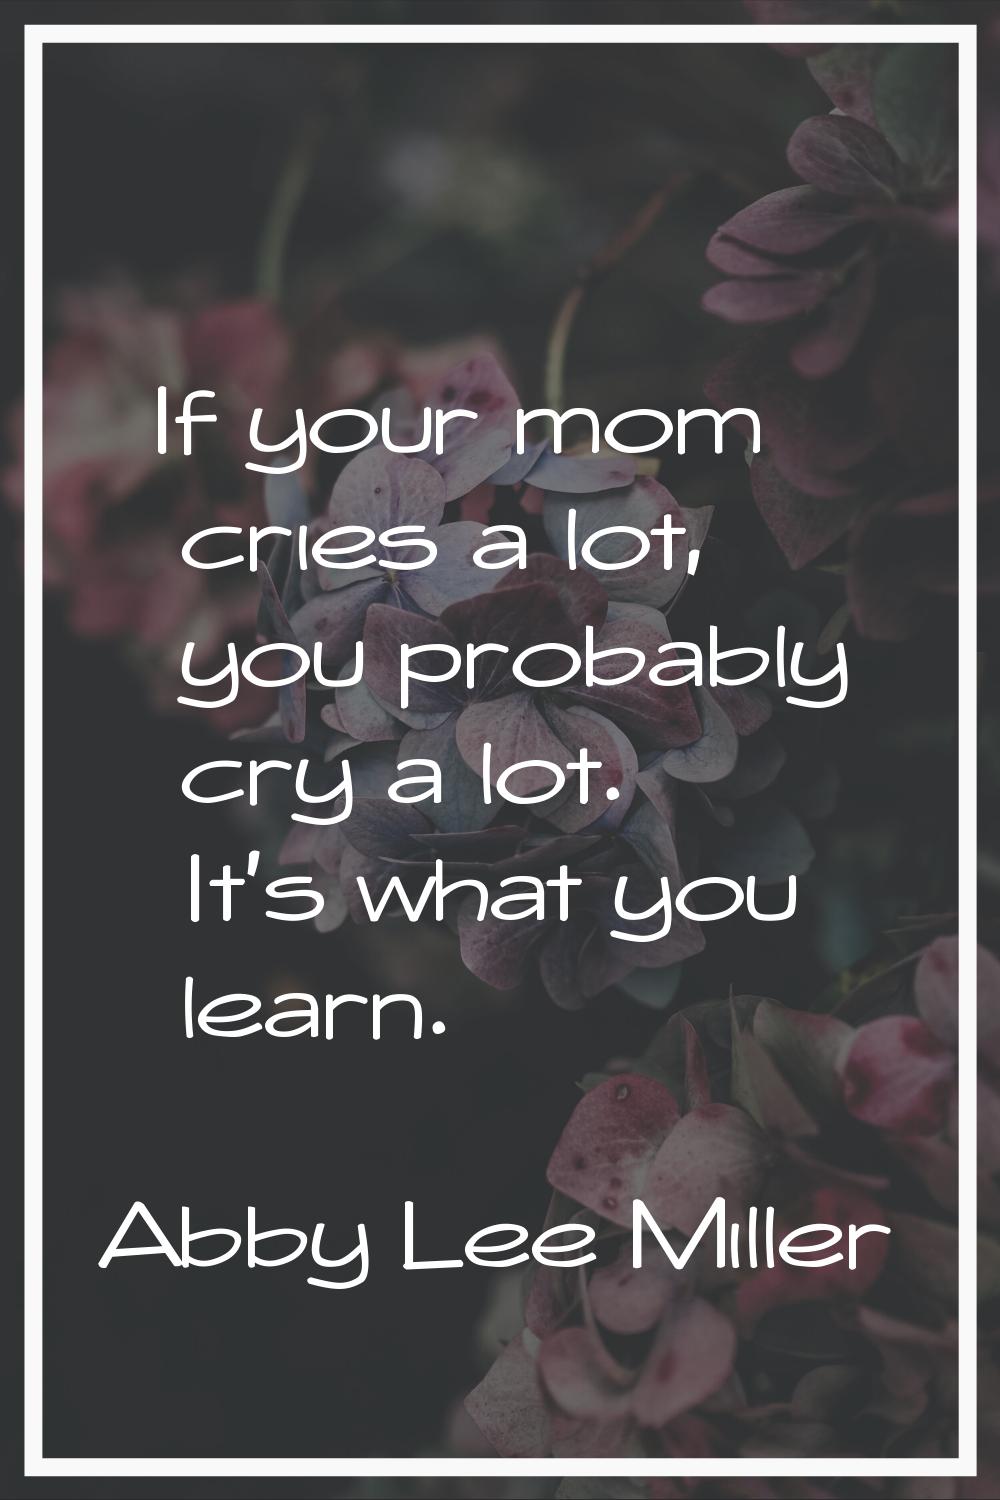 If your mom cries a lot, you probably cry a lot. It's what you learn.